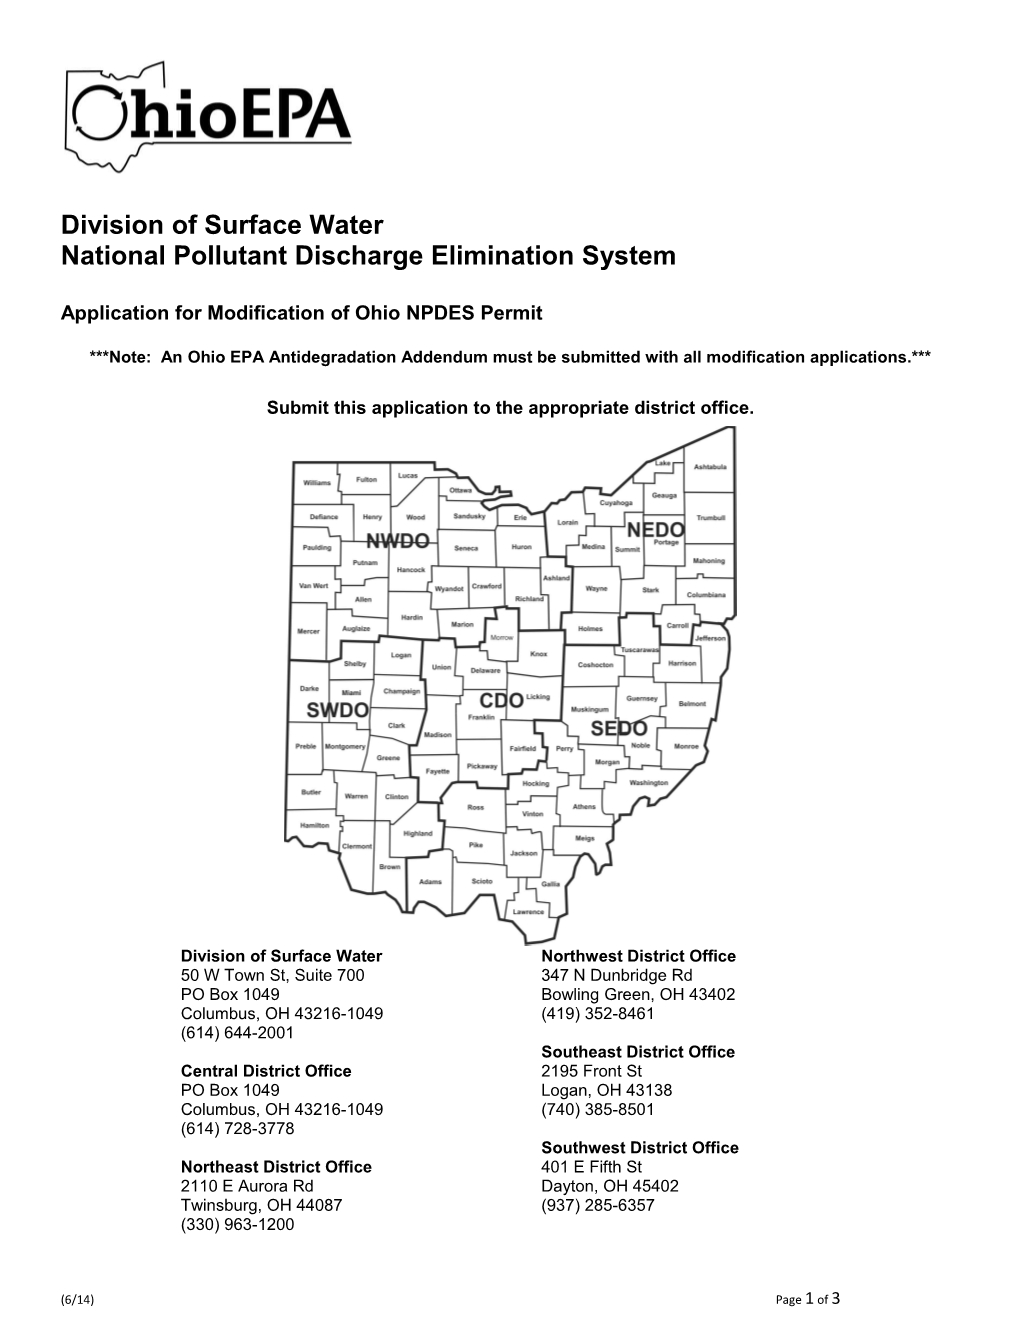 Application for Modification of Ohio NPDES Permit